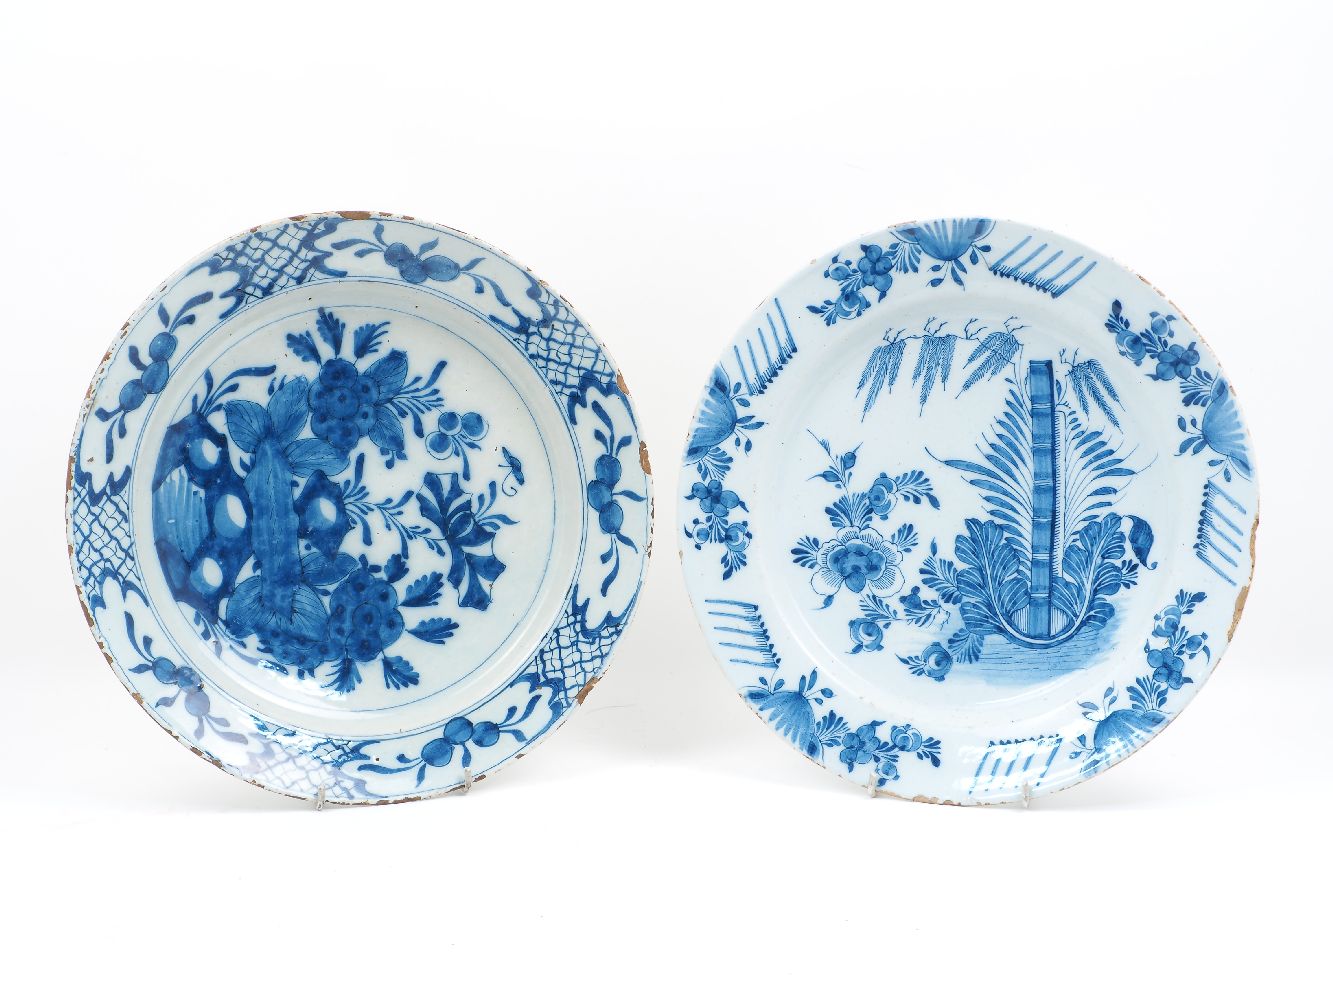 An 18th century Dutch Delft Ware charger, decorated in blue and white stylised naturalistic forms,